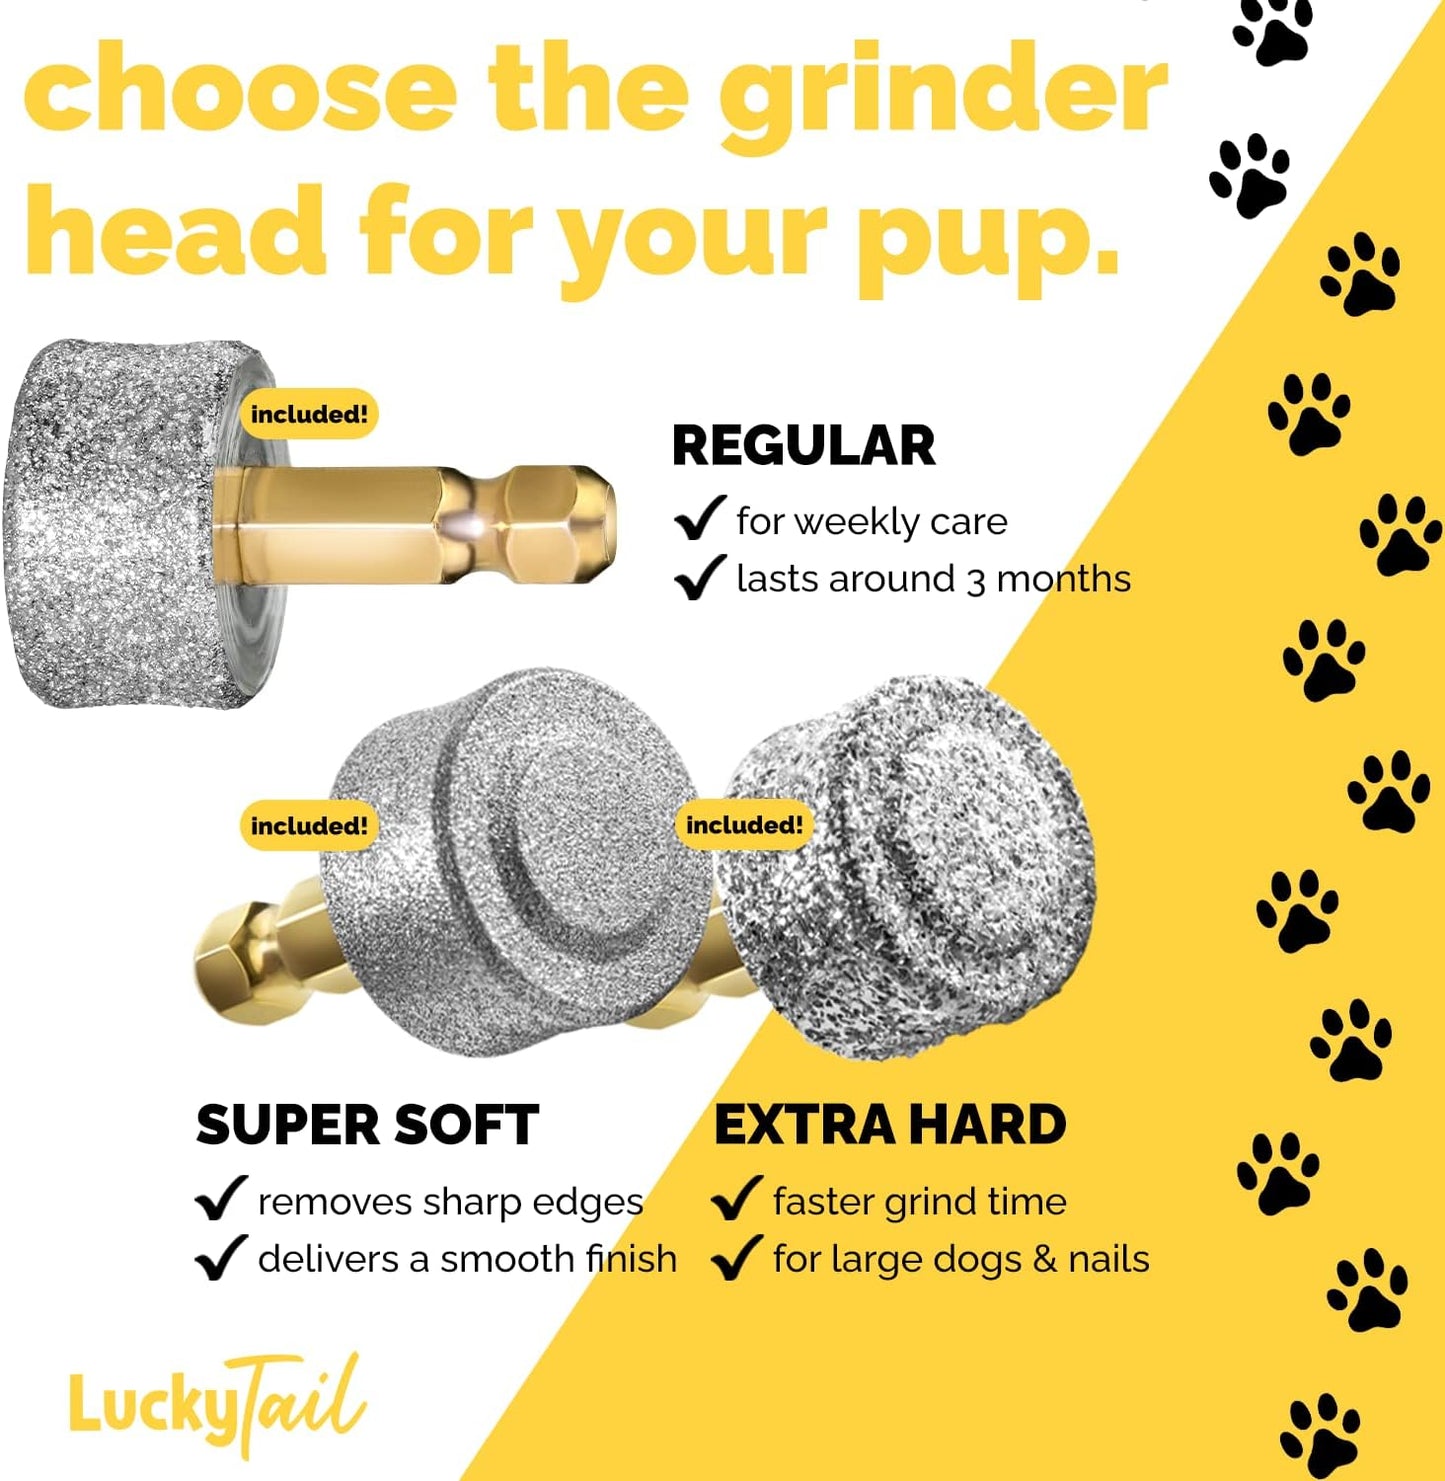 LuckyTail - Dog Nail Grinder - Regular, Extra Hard & Super Soft Replacement Head - Small & Large Dogs - Premium Quality - Diamond Tip Drill Bit - Professional Dog Nail Trimmers - Grooming Kit - 3 Pack